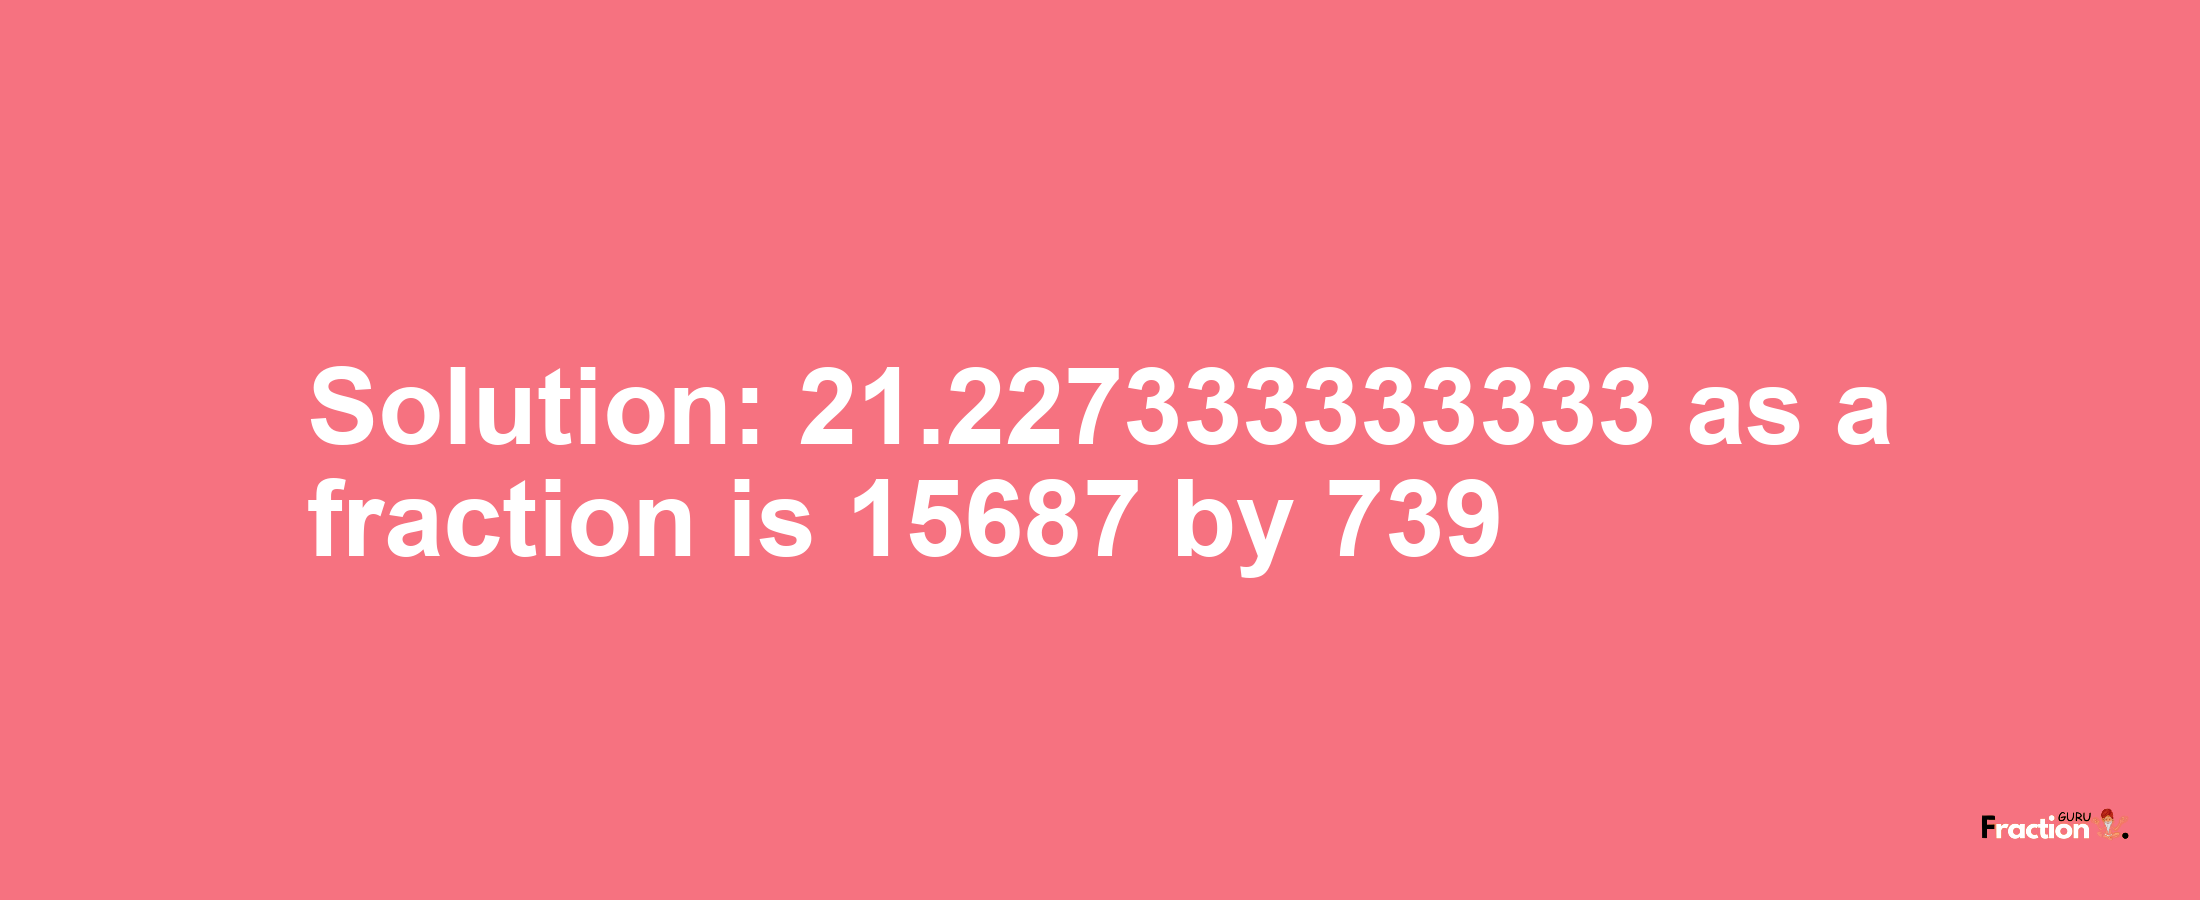 Solution:21.227333333333 as a fraction is 15687/739